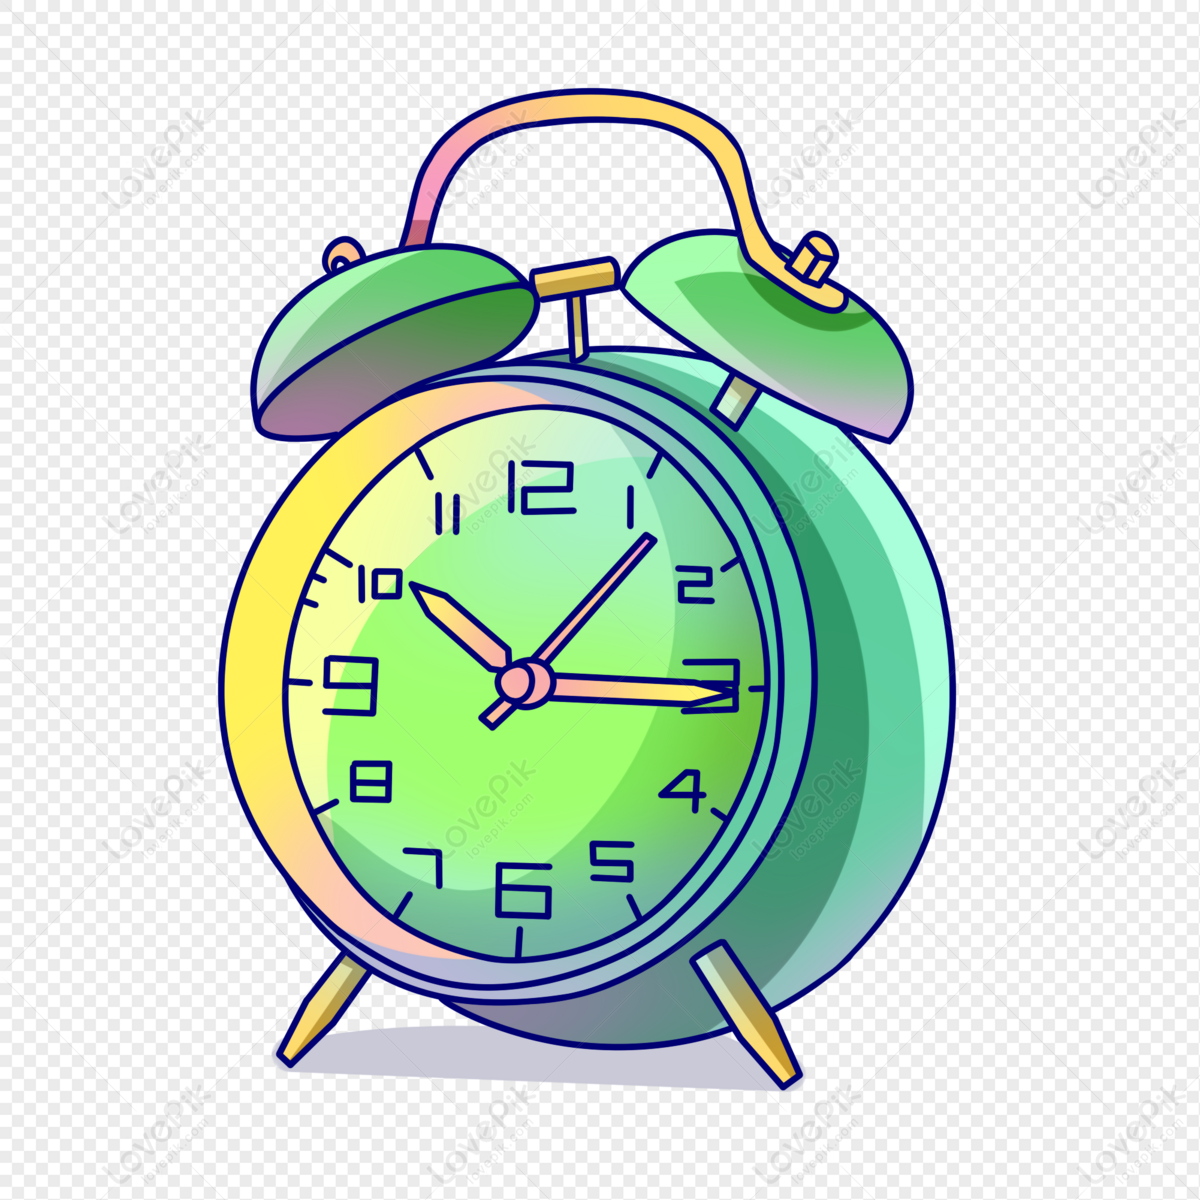 Cartoon Alarm Clock Picture PNG Transparent Background And Clipart Image  For Free Download - Lovepik | 401484660